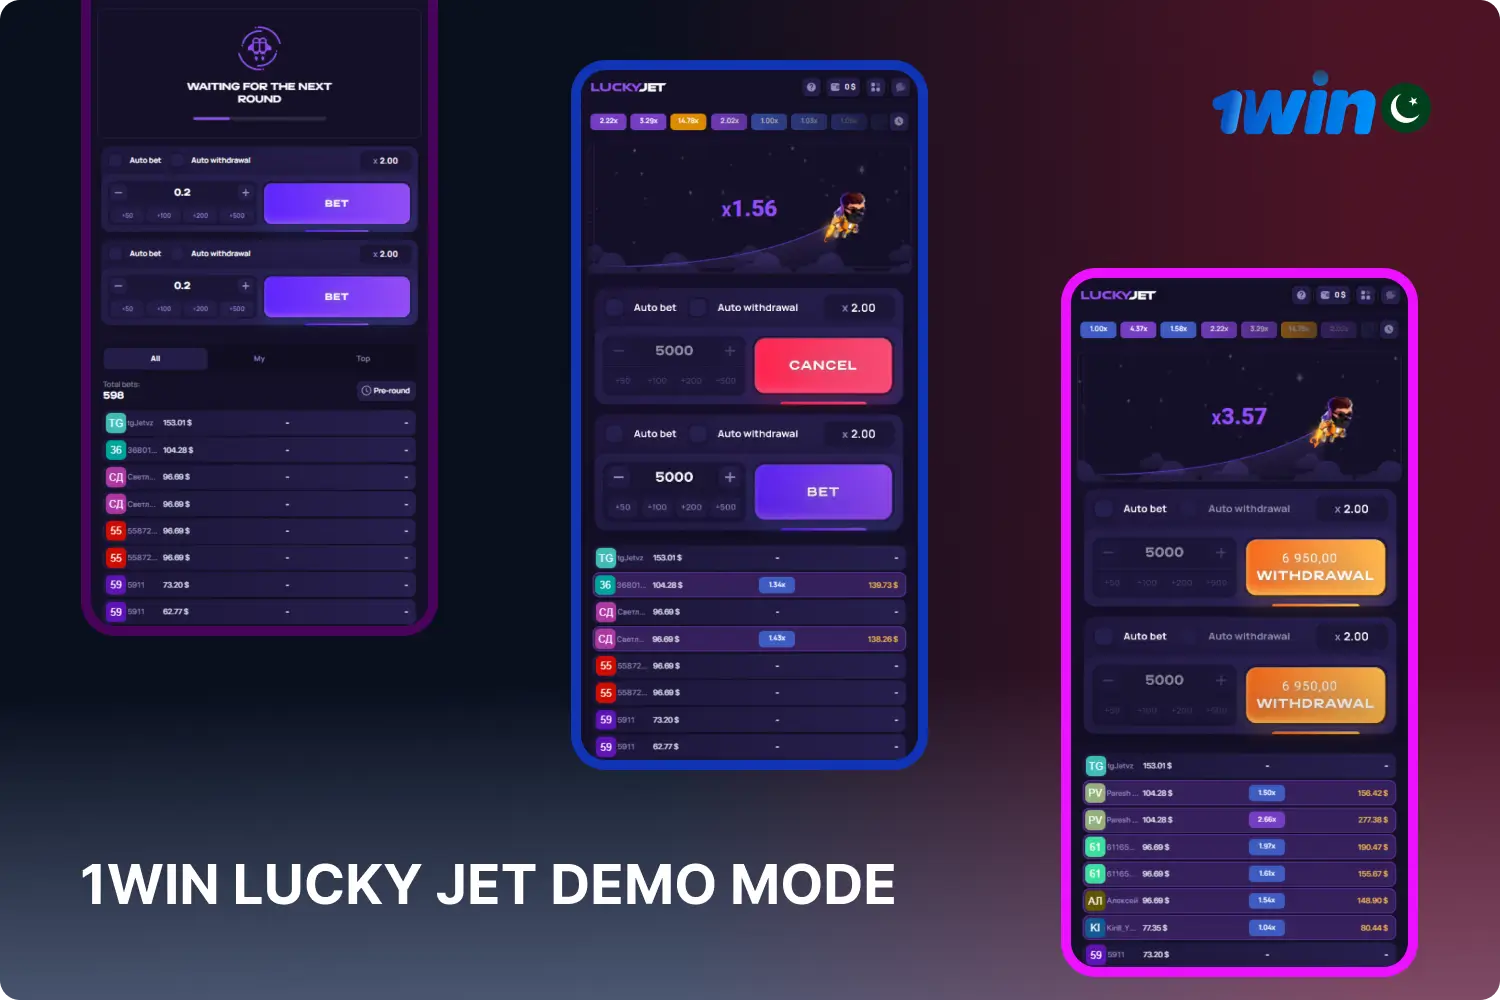 The Lucky Jet game in demo mode at 1win allows players to use their virtual balance without depositing to have fun and learn the rules of the game